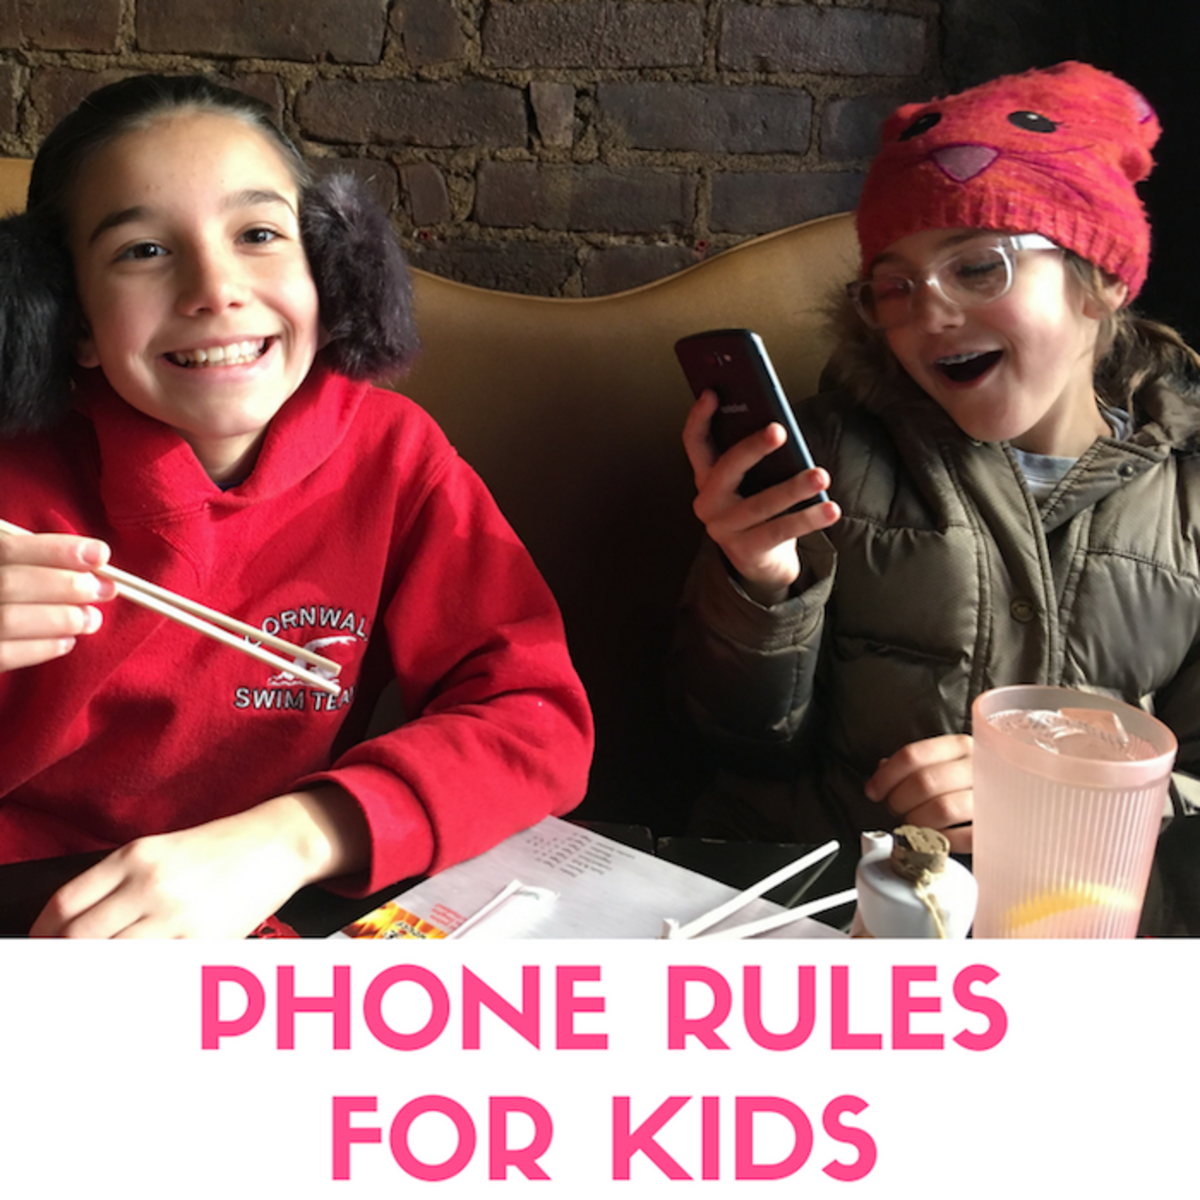 PHONE RULES FOR KIDS